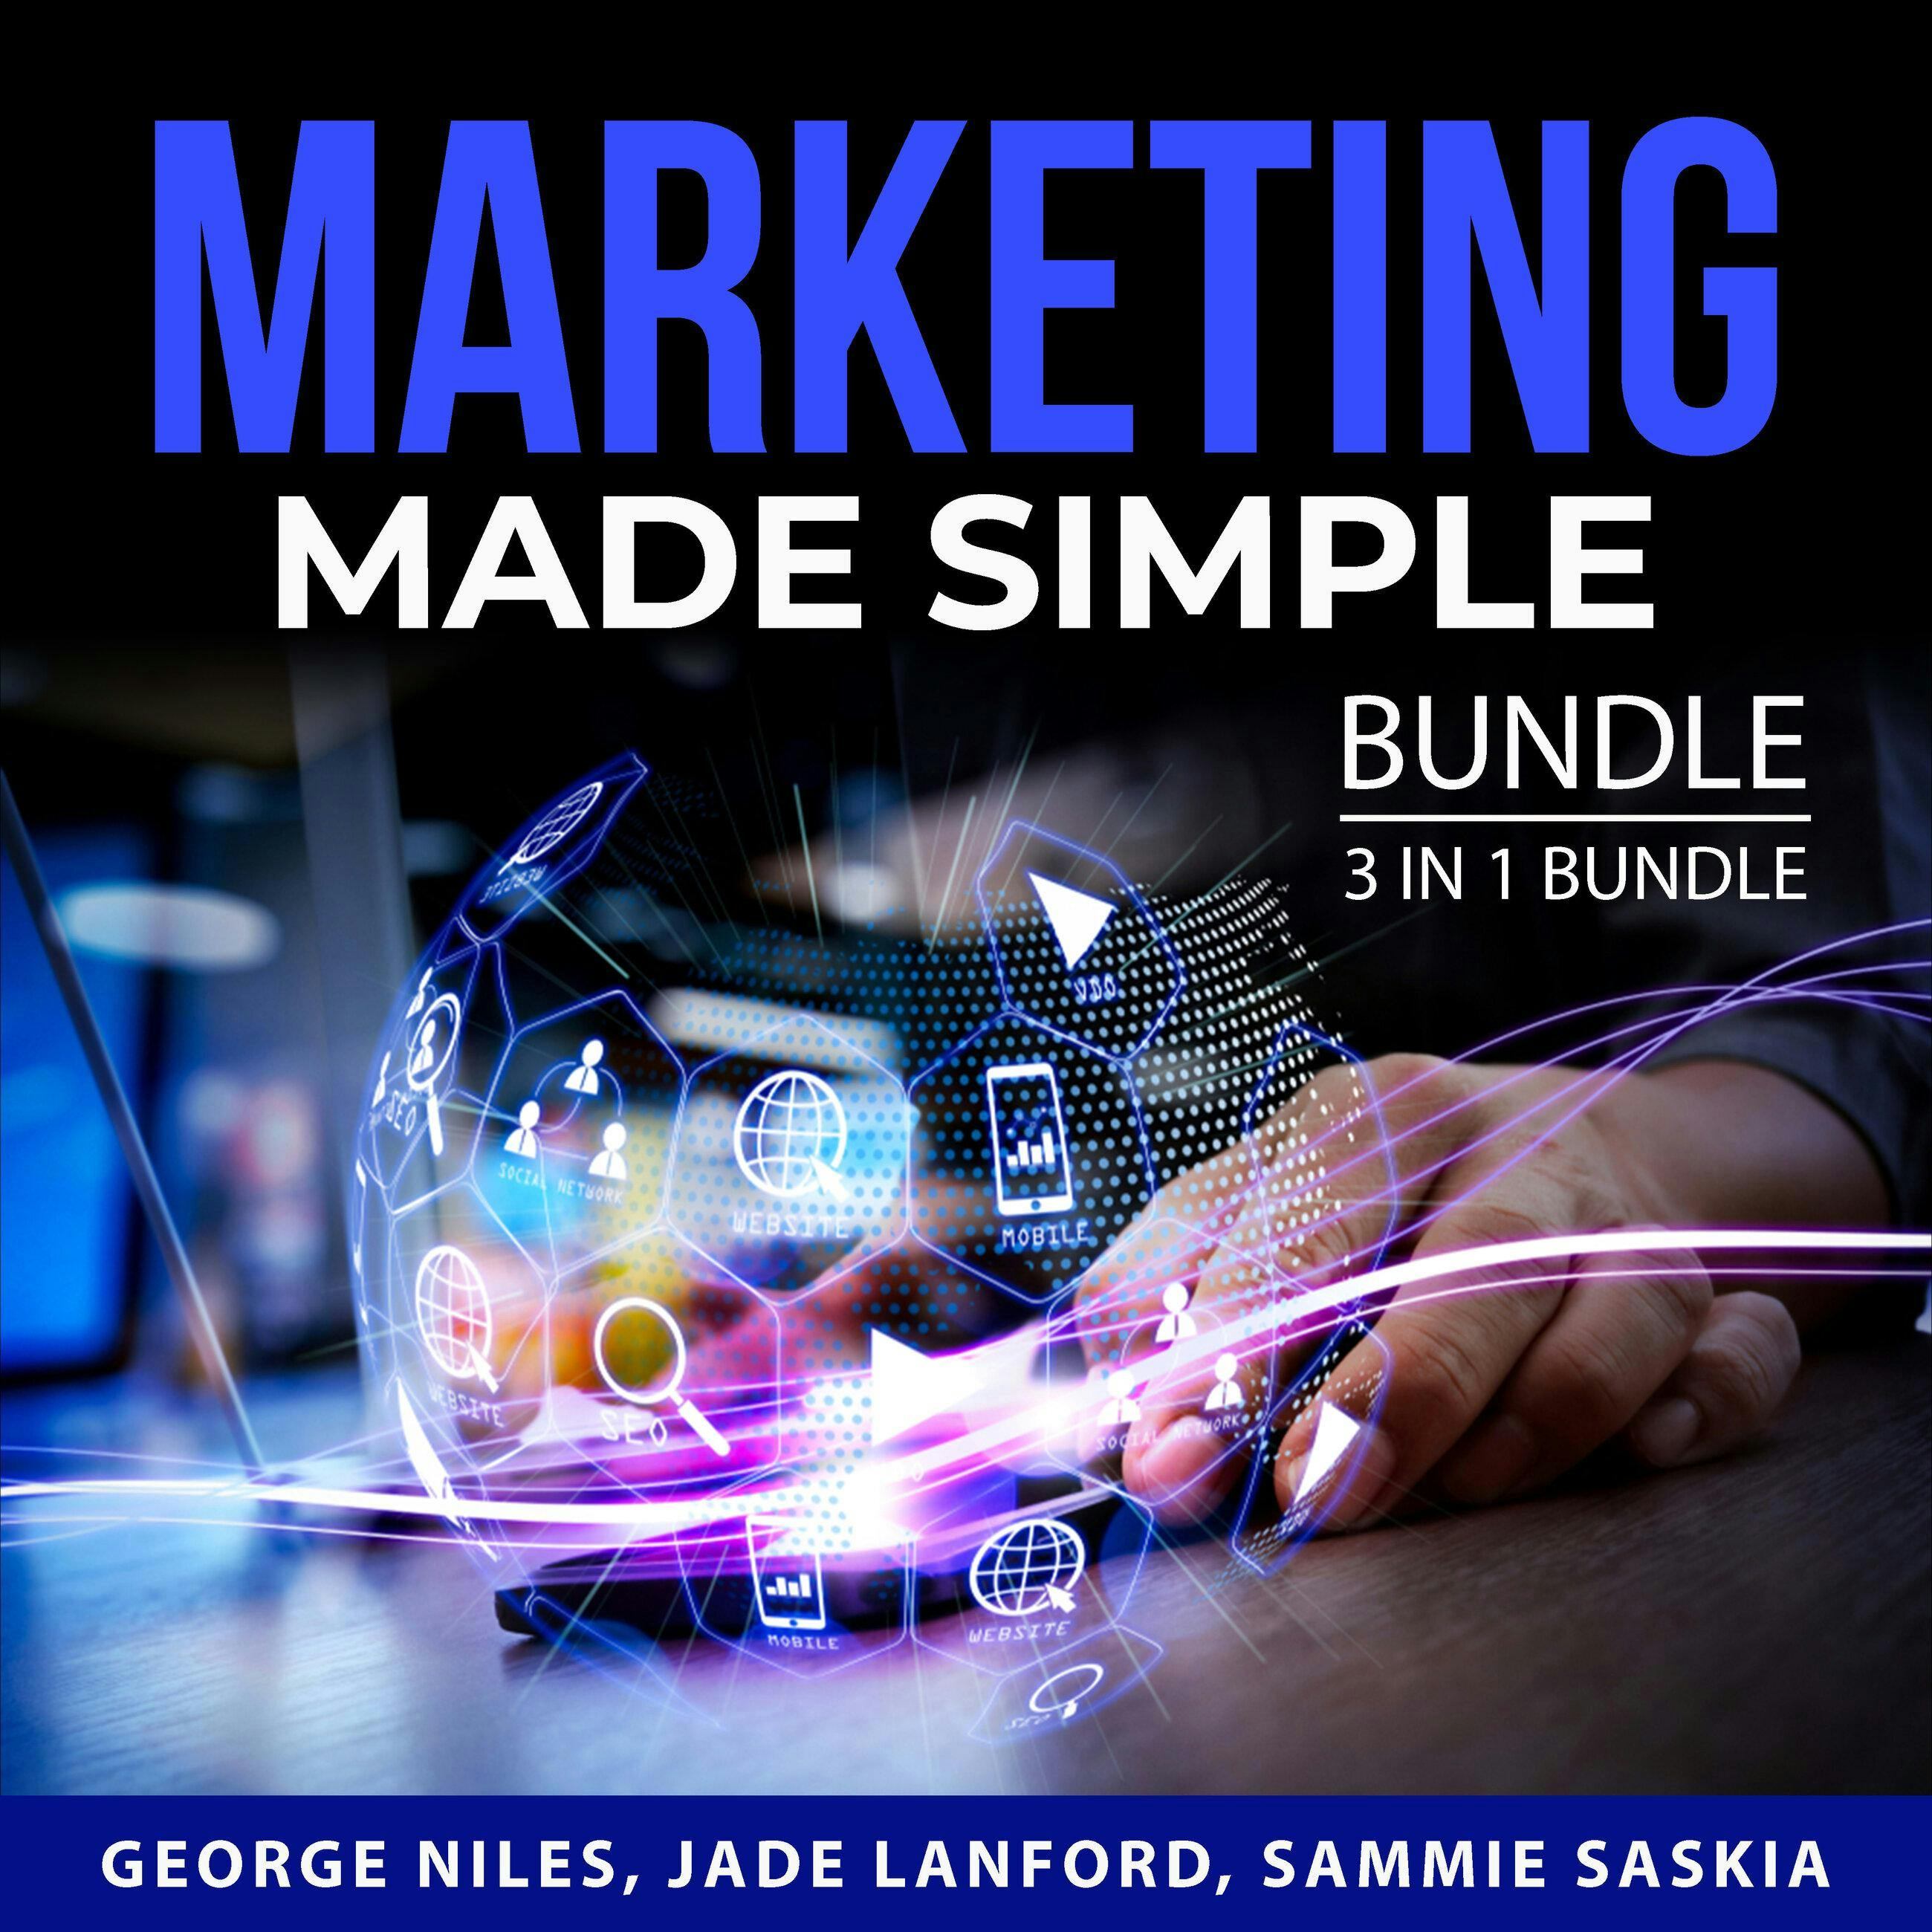 Marketing Made Simple Bundle, 3 in 1 Bundle: Marketing Systems, Online Marketing Guide, and Internet Marketing Plan - undefined